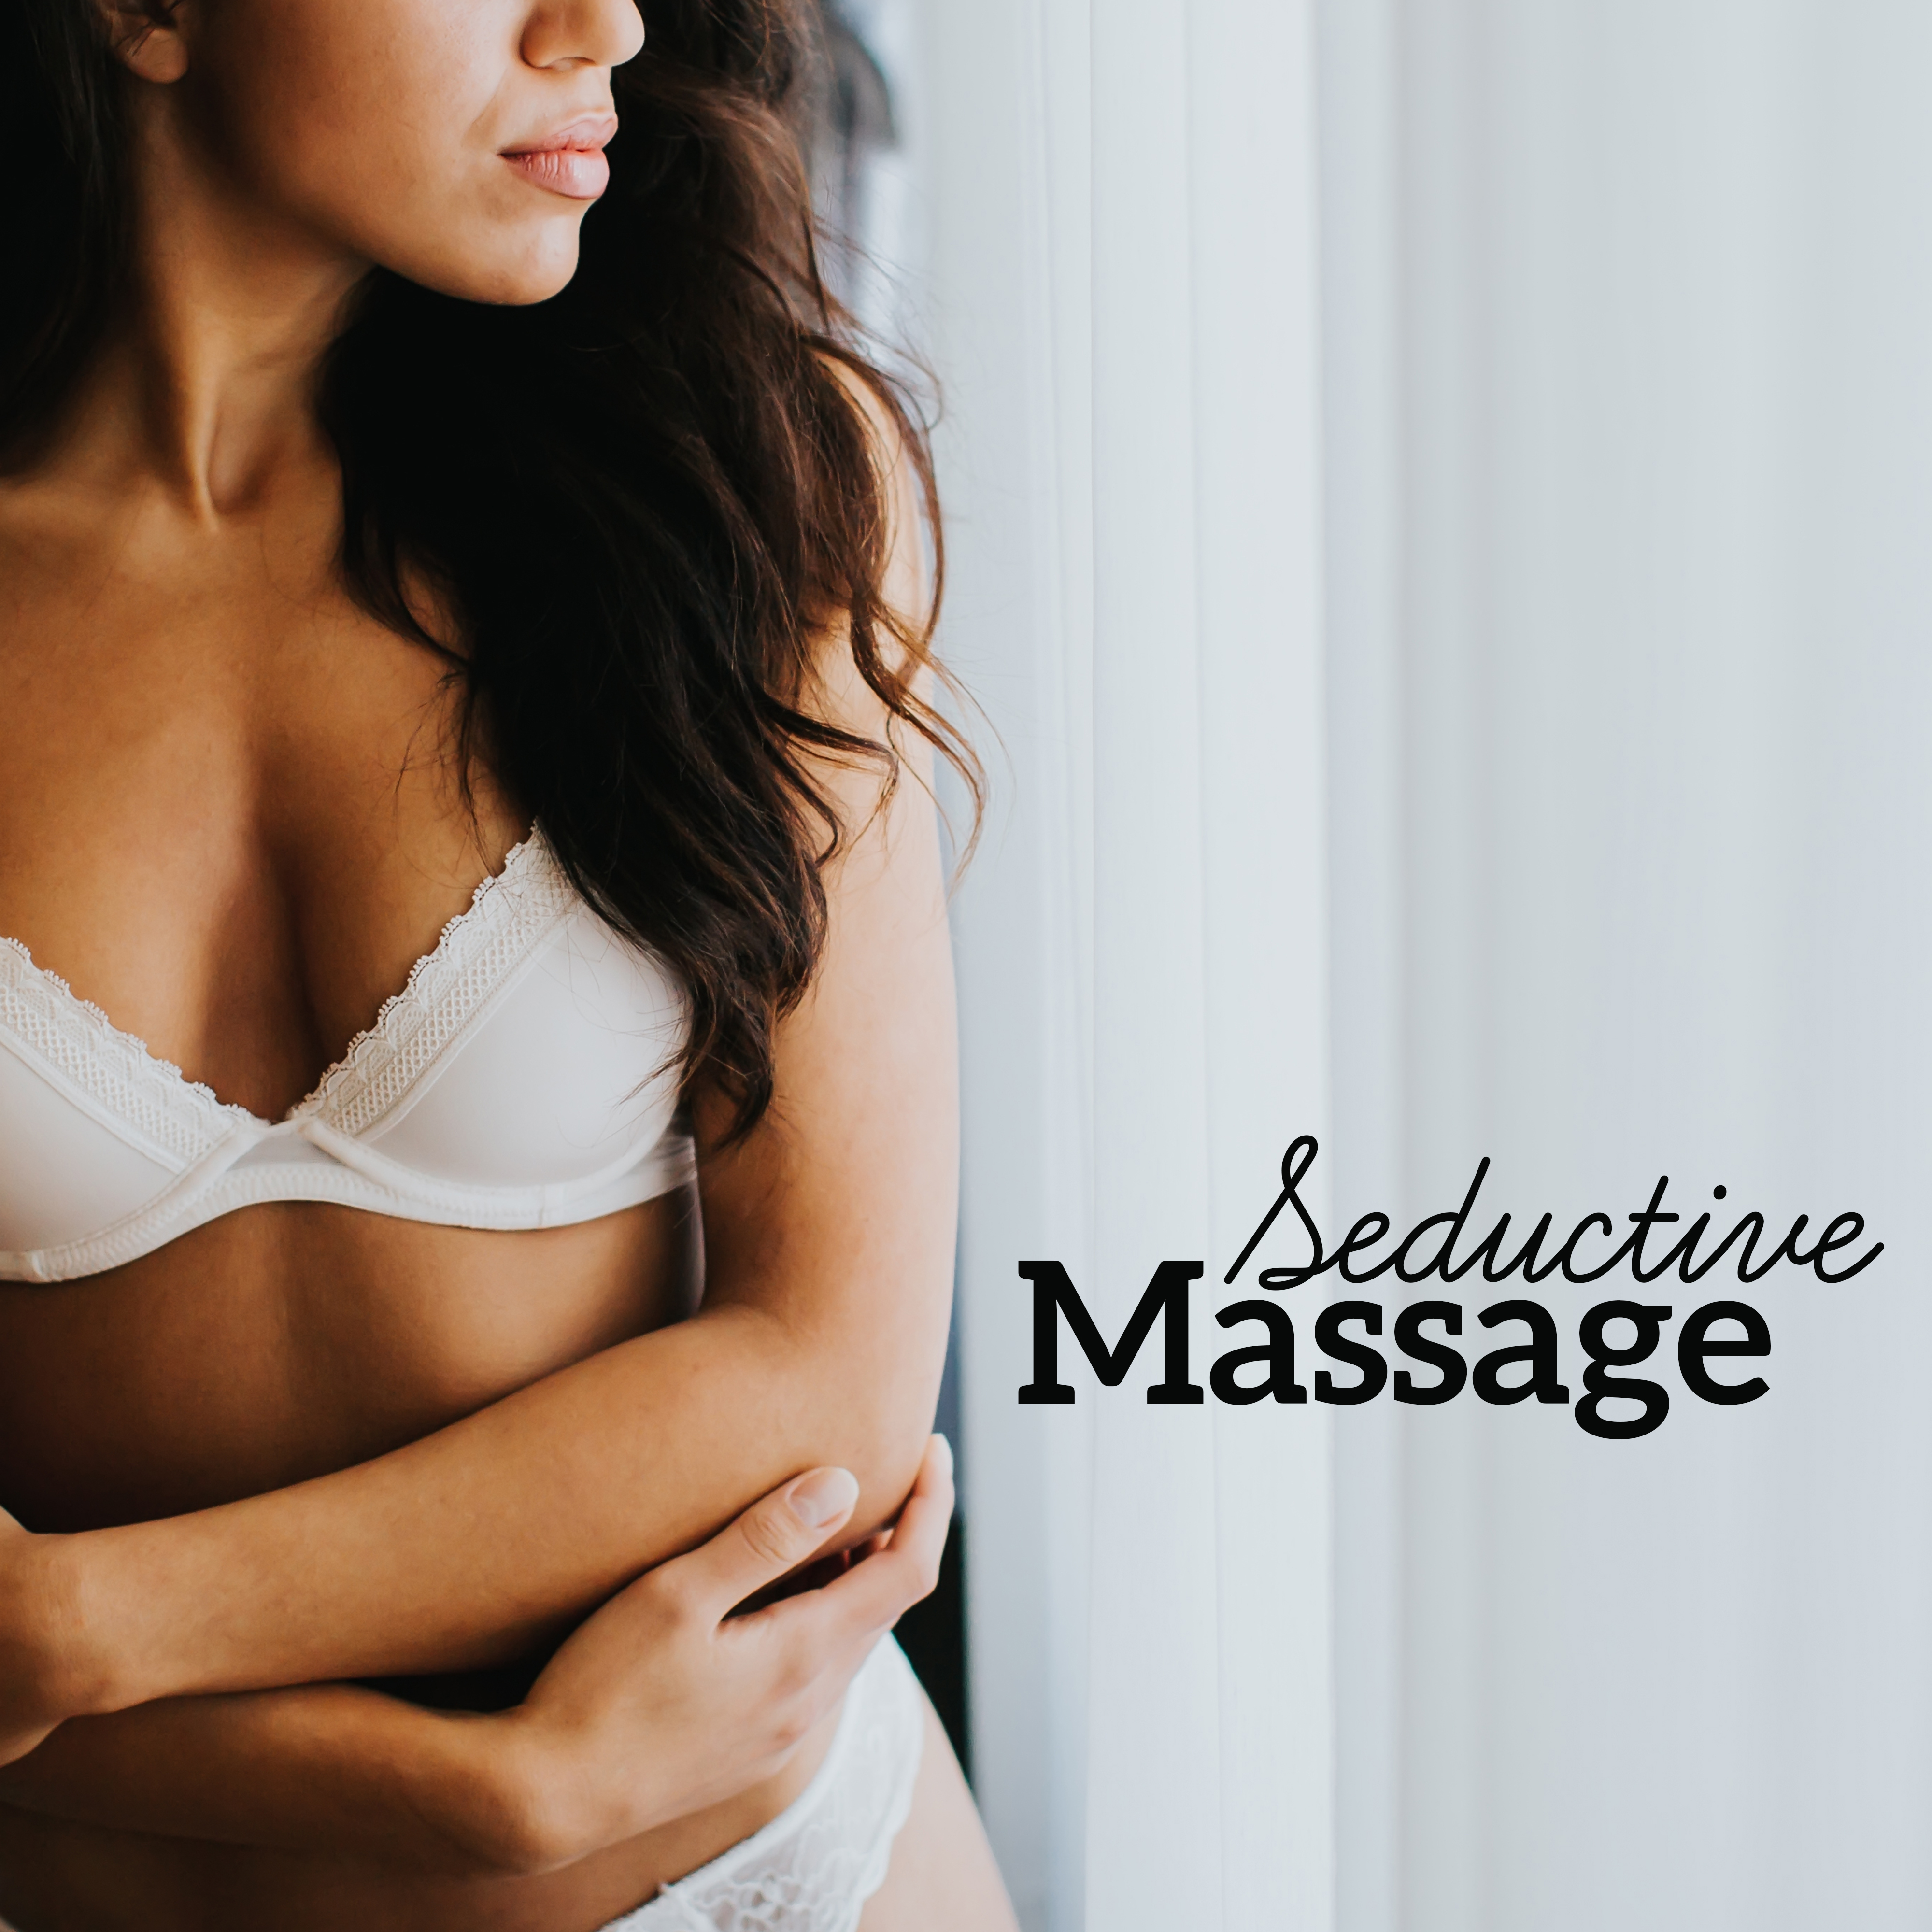 Seductive Massage: **** and Sensual Sounds for Massage, Rest, *** and Night Games